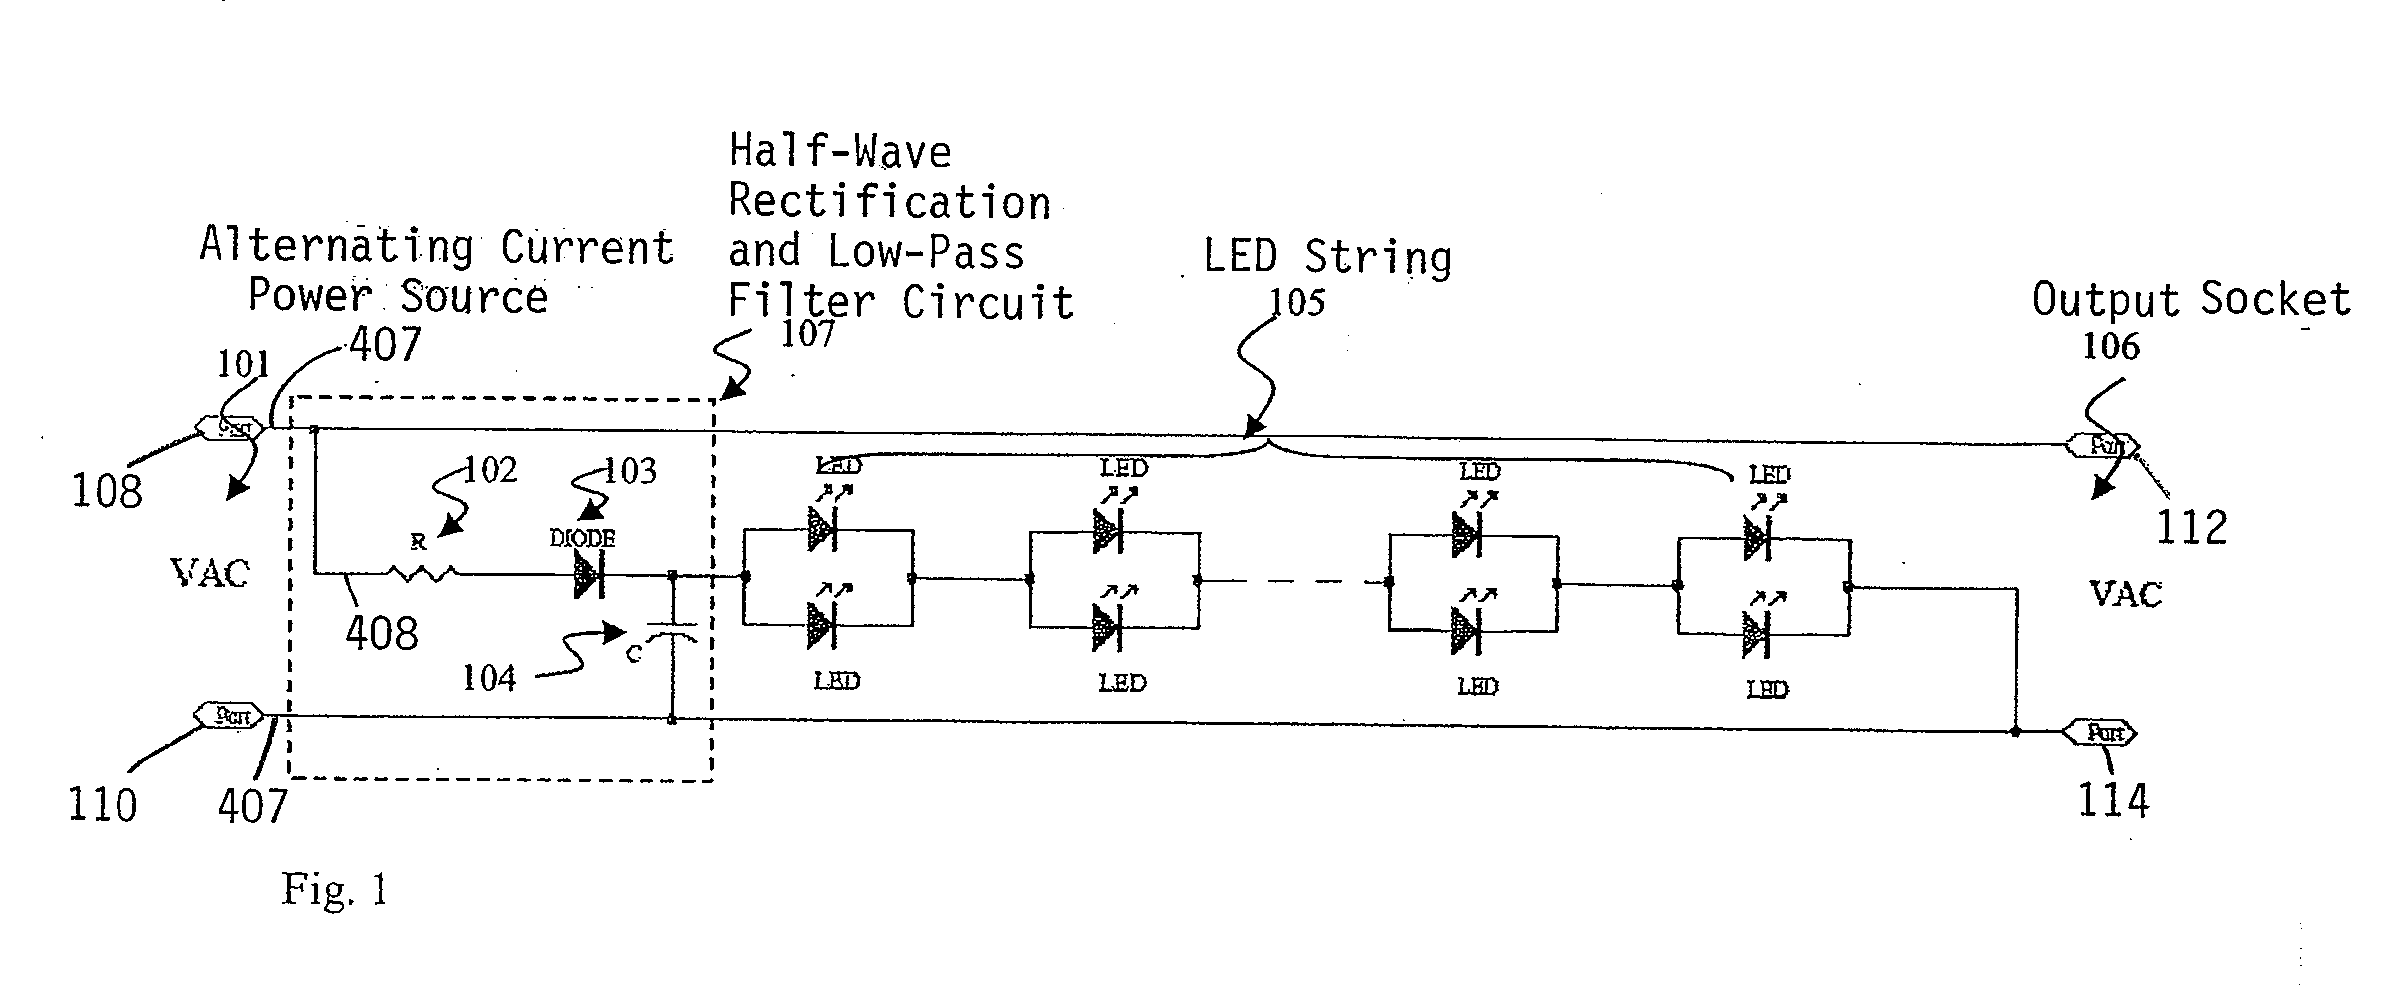 Half-wave rectification circuit with a low-pass filter for LED light strings